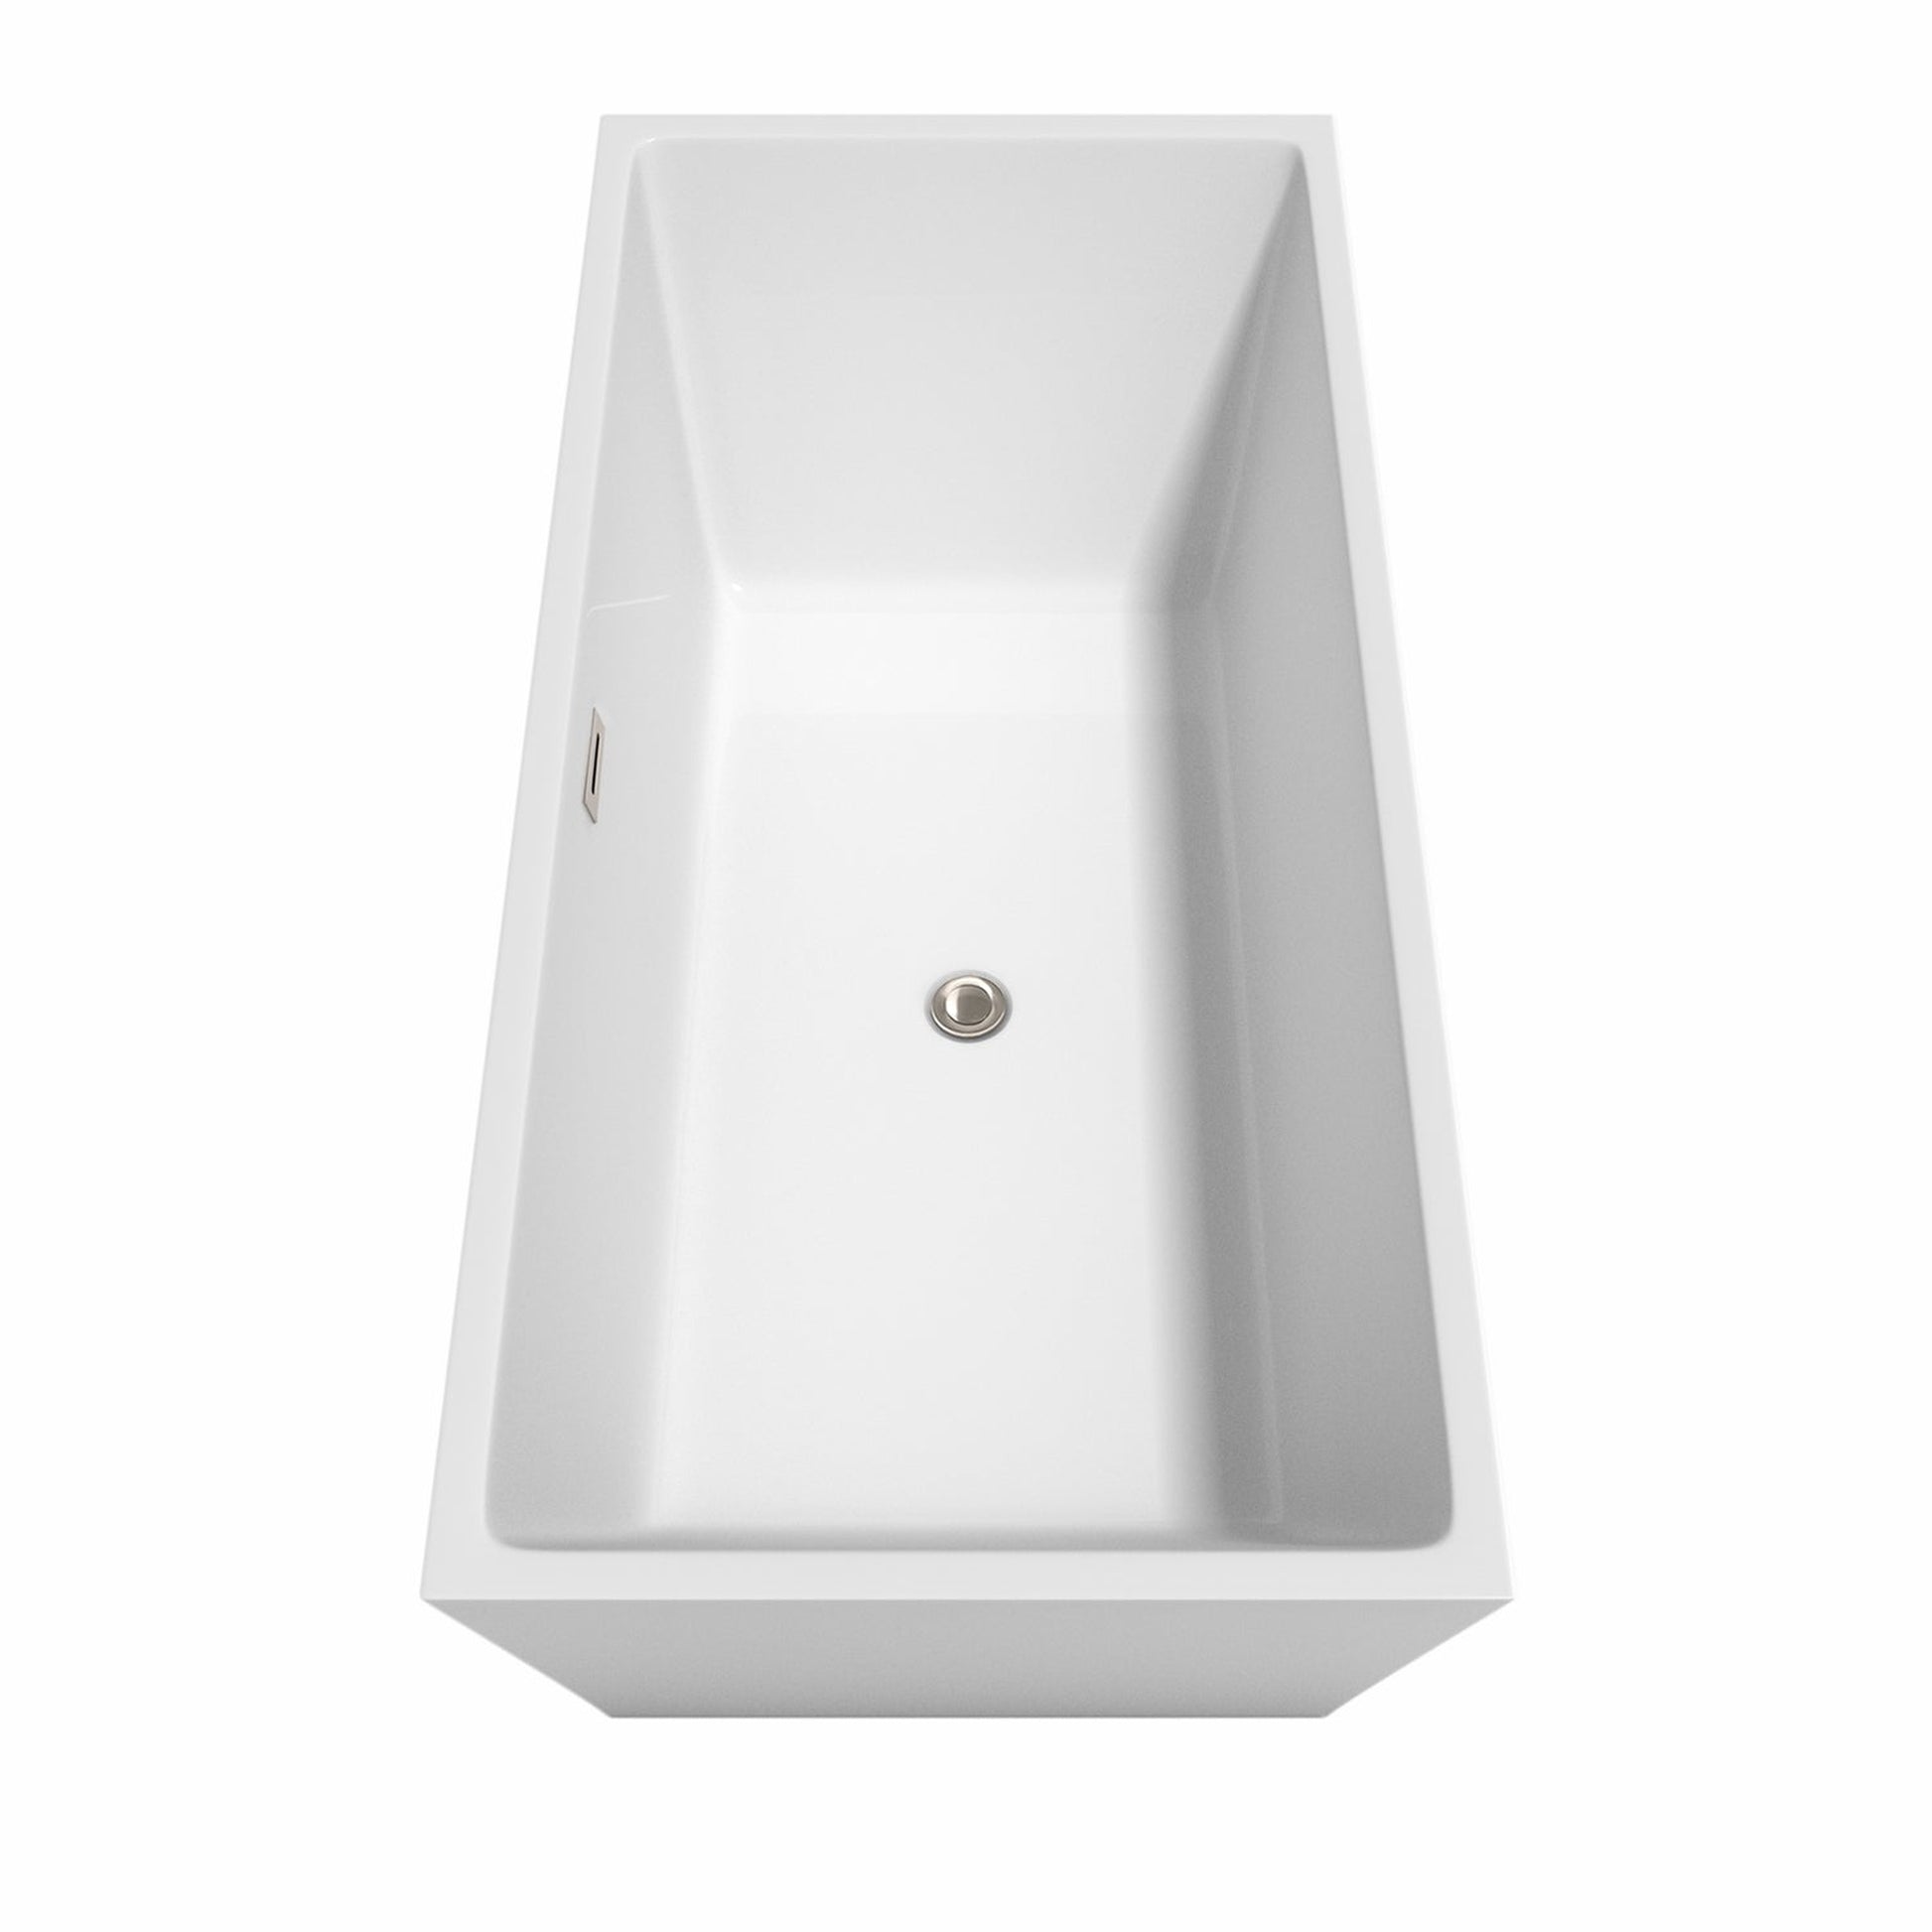 Wyndham Collection Sara 67" Freestanding Bathtub in White With Brushed Nickel Drain and Overflow Trim